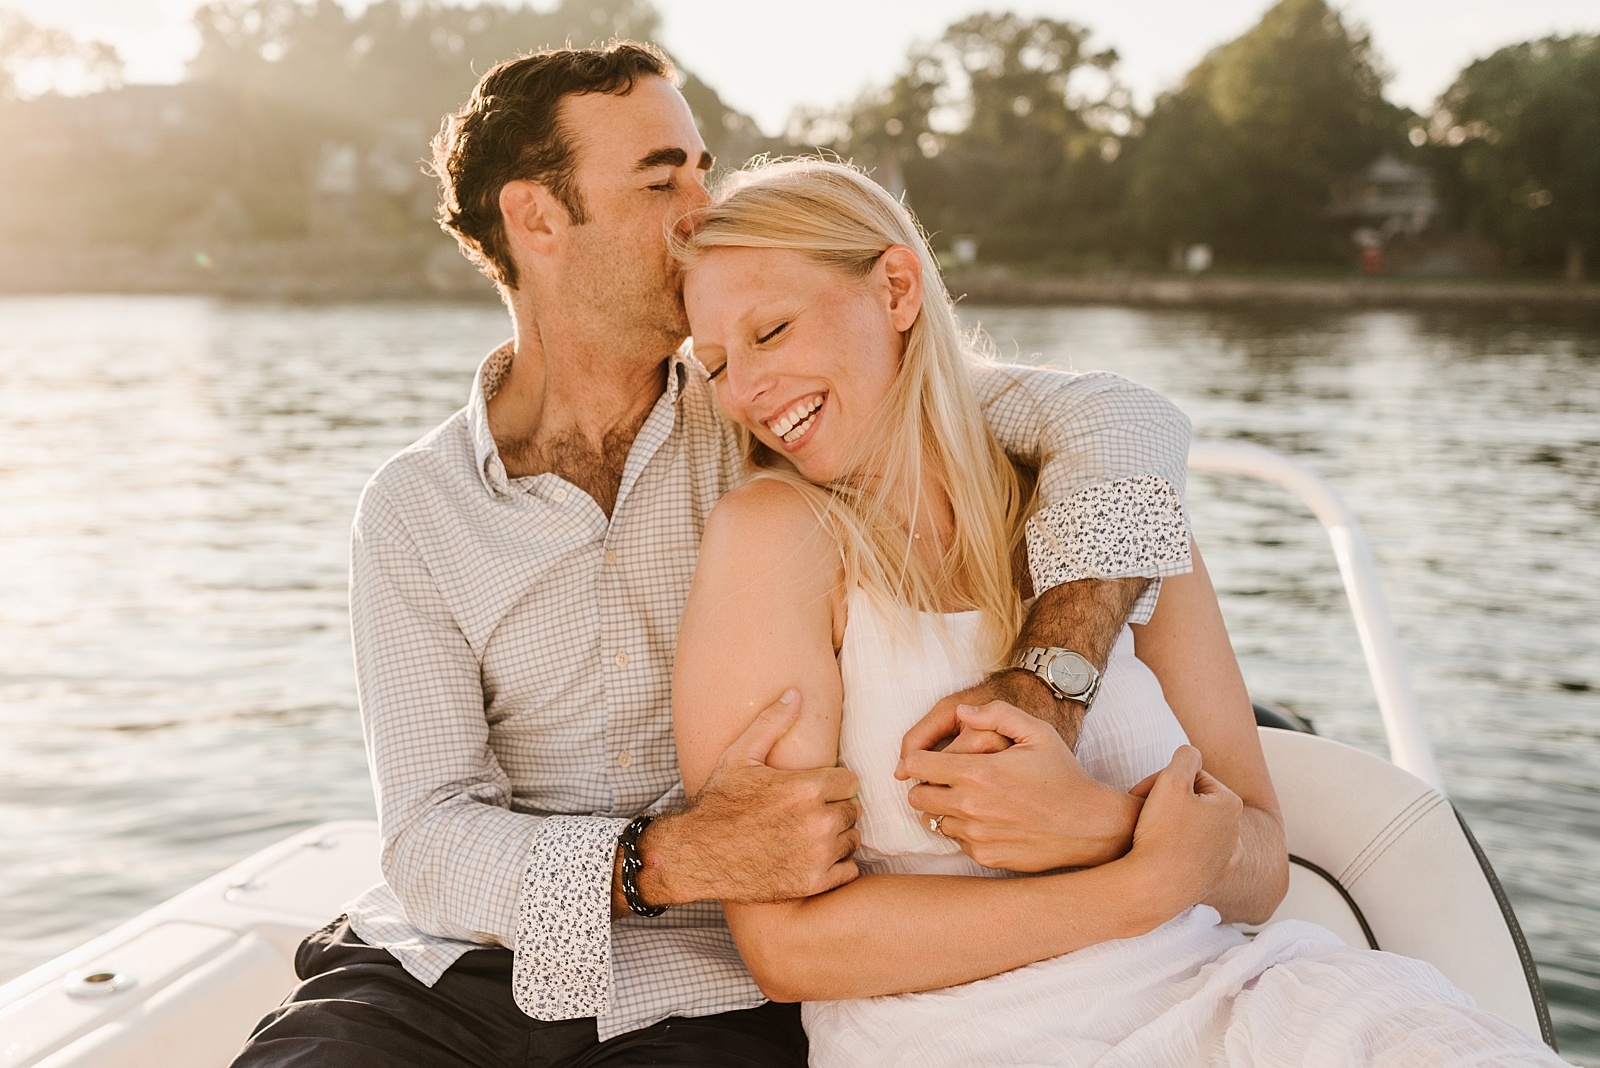 Eastern Yacht Club Engagement Session Photos in Marblehead, MA by Boston Wedding Photographer Annmarie Swift